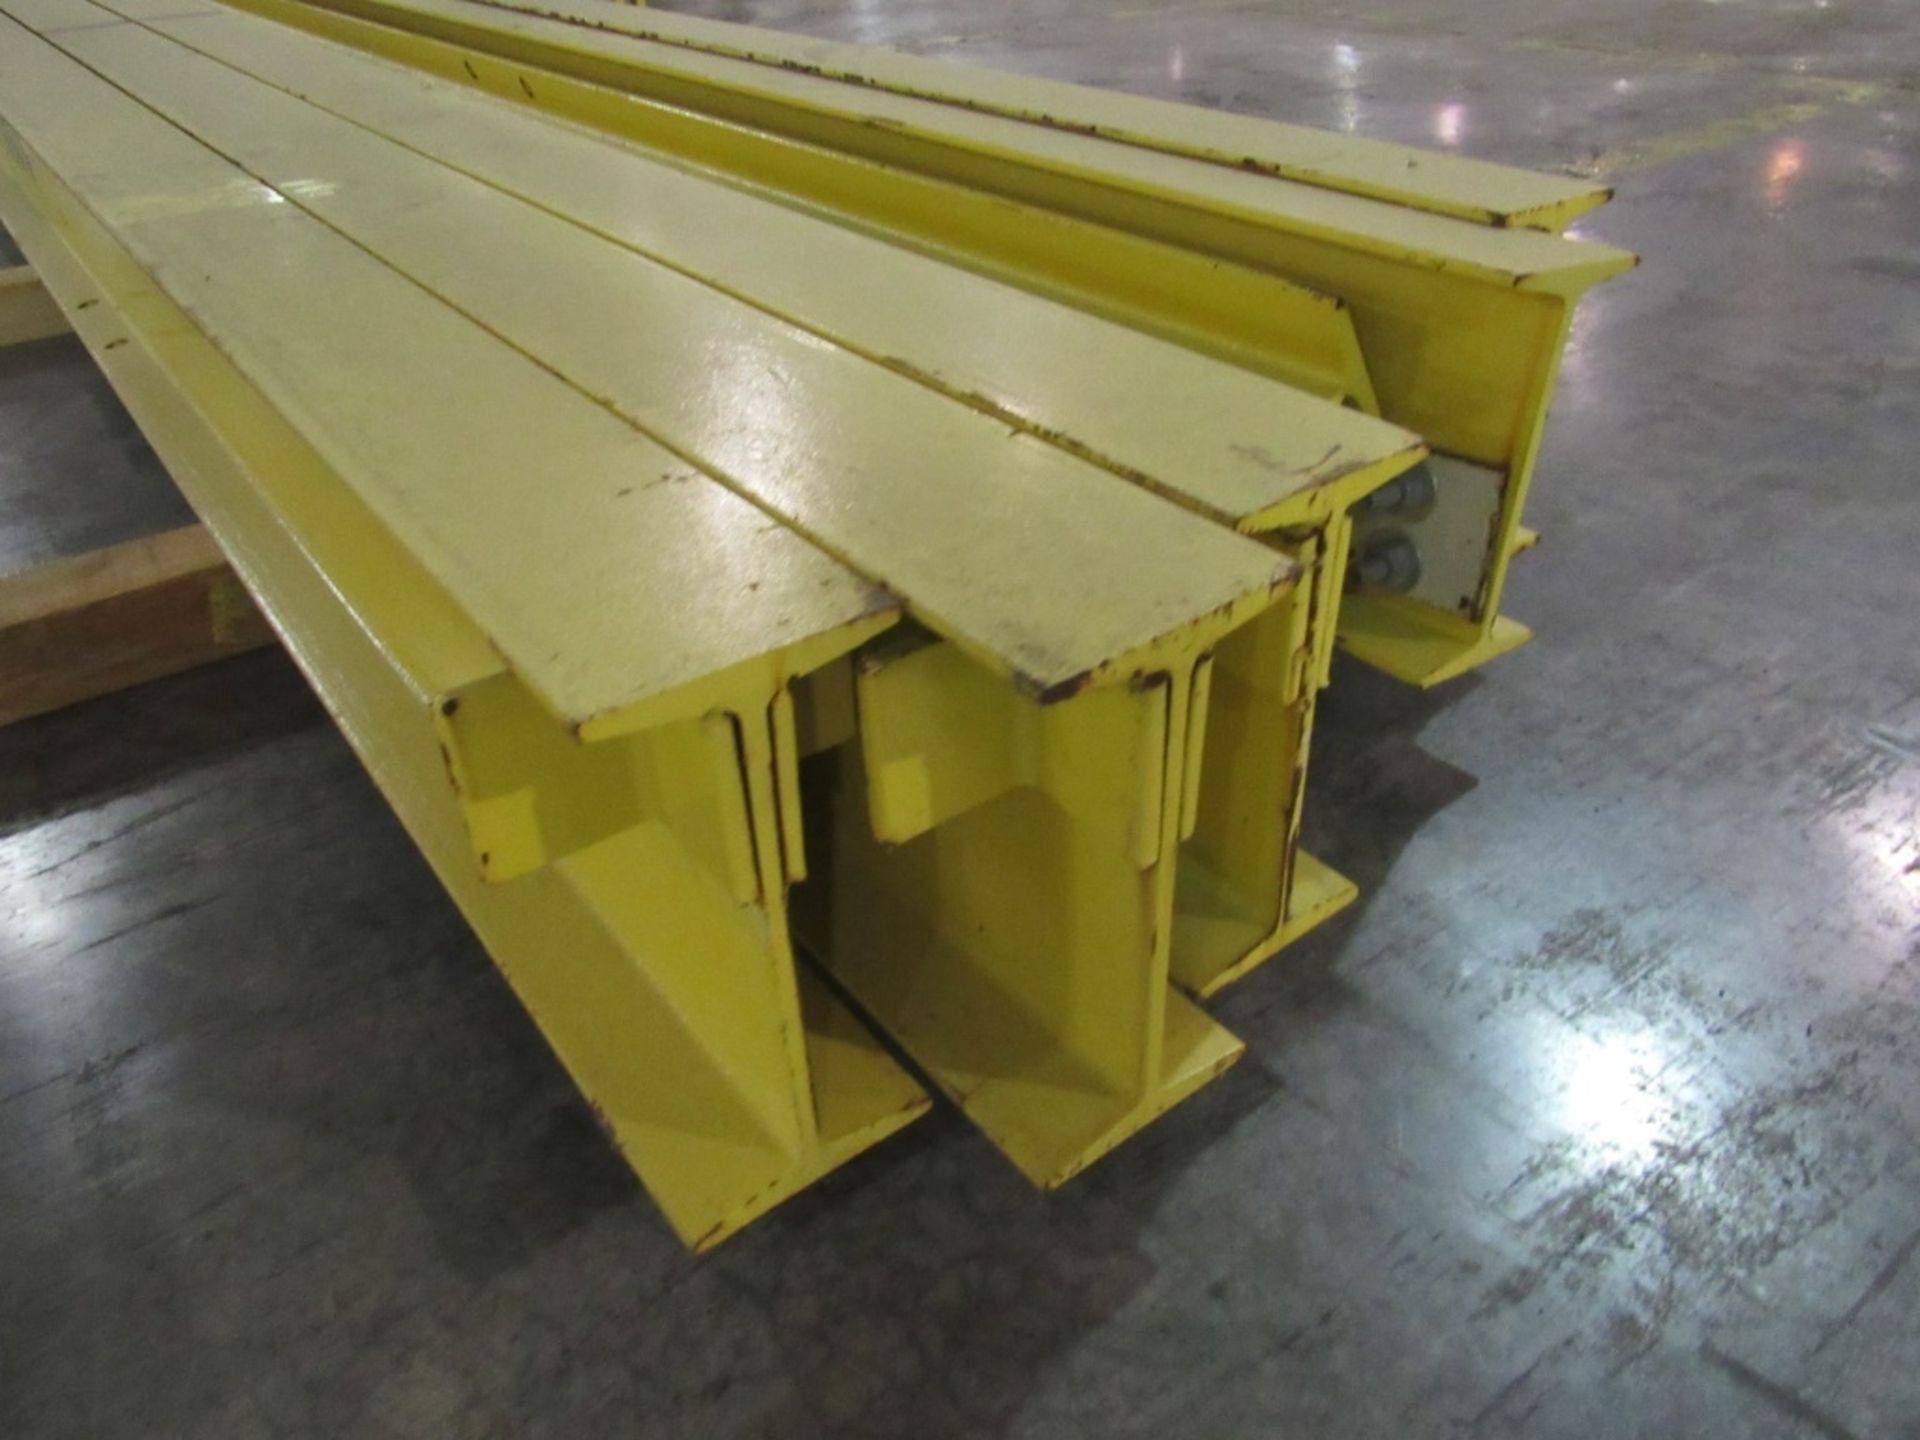 Overhead Crane Parts- ***Located in Cleveland, TN*** MFR - Tragfahigkeit (6) Beams/ Supports 25' x - Image 8 of 10